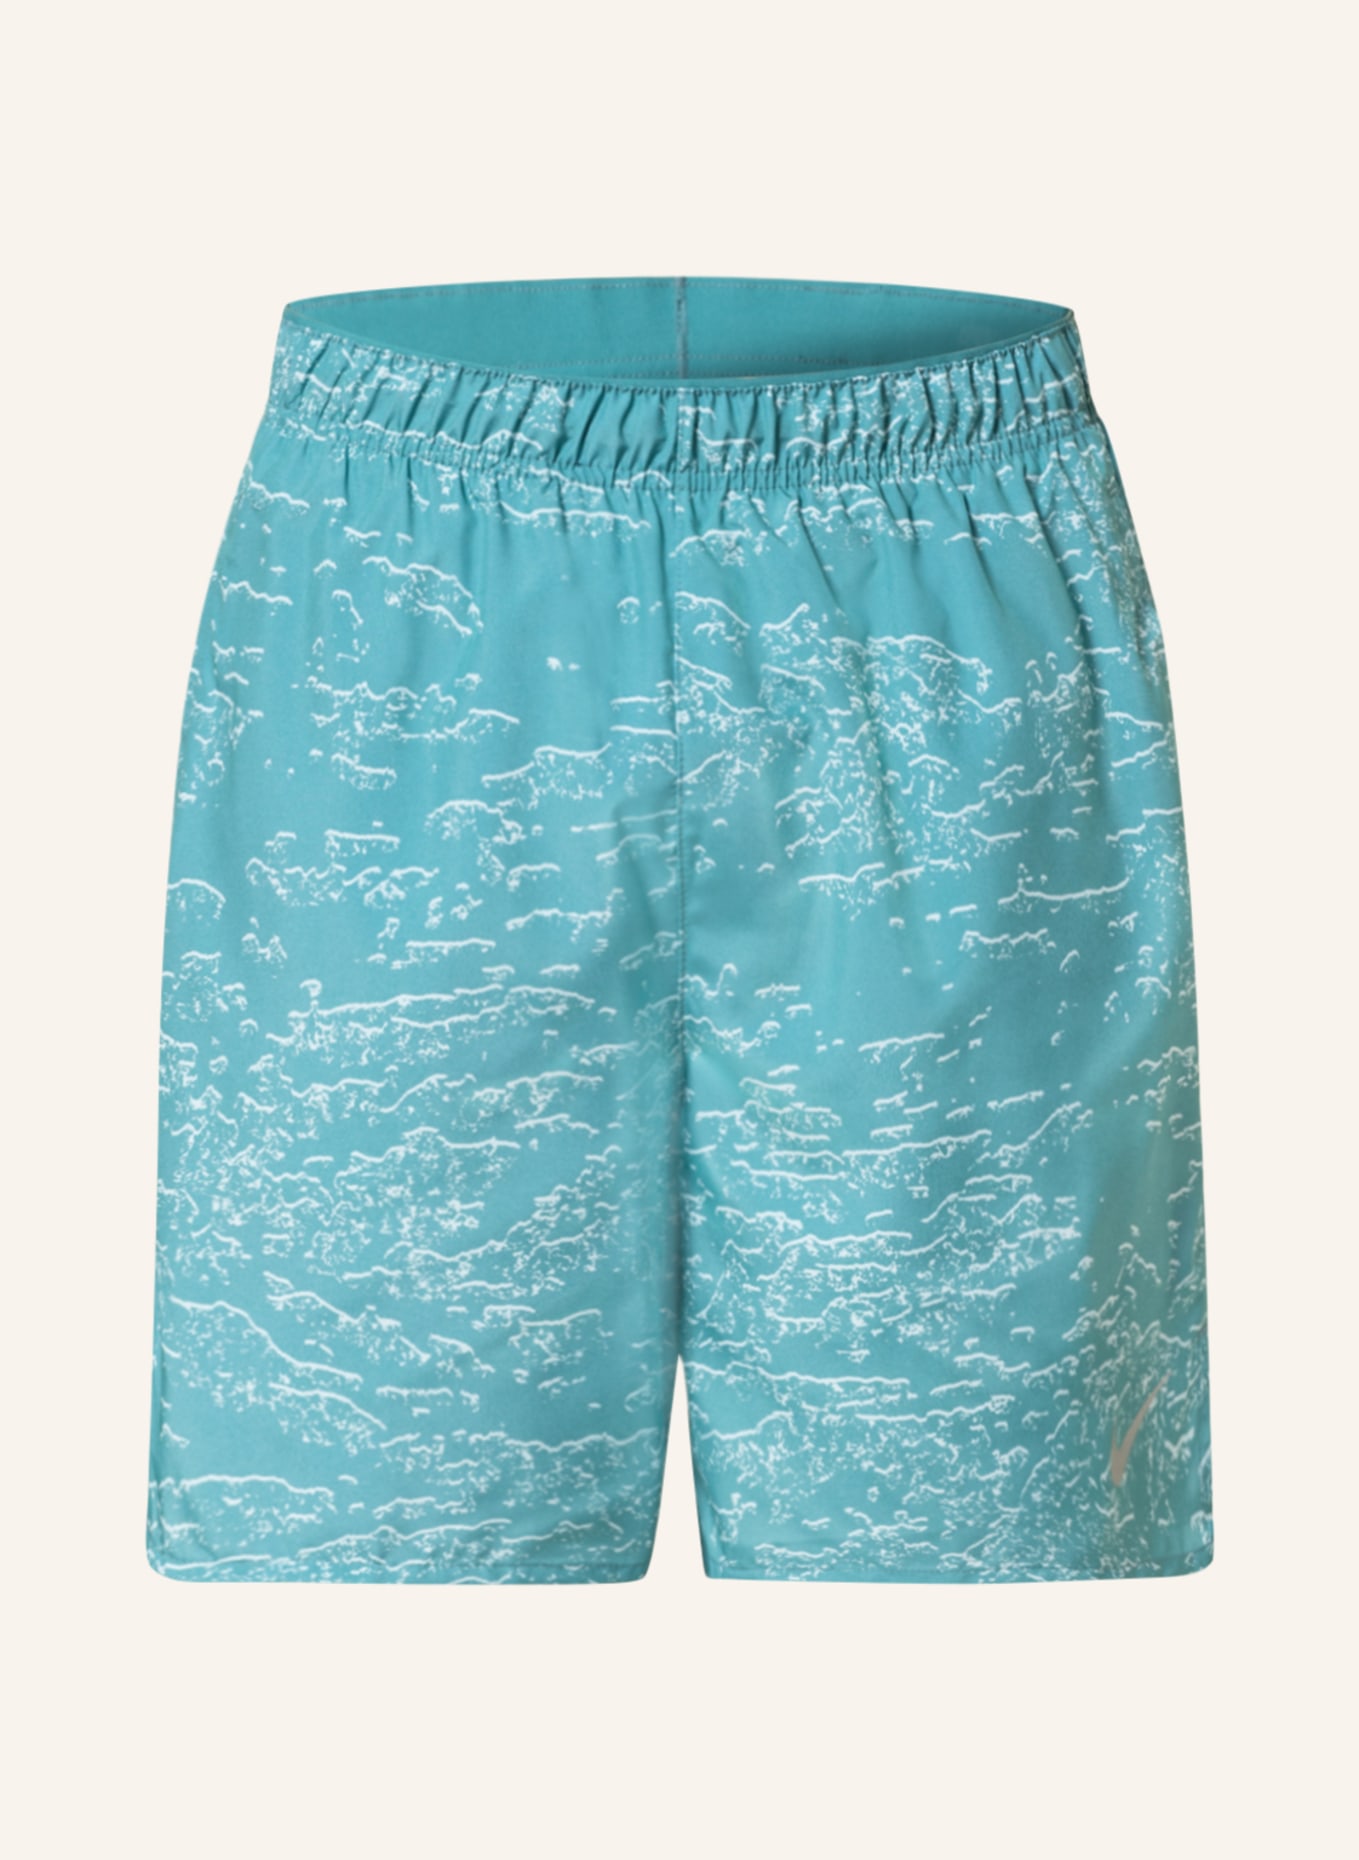 Nike 2-in-1 running shorts DRI-FIT RUN DIVISION CHALLENGER, Color: TEAL/ LIGHT GRAY (Image 1)